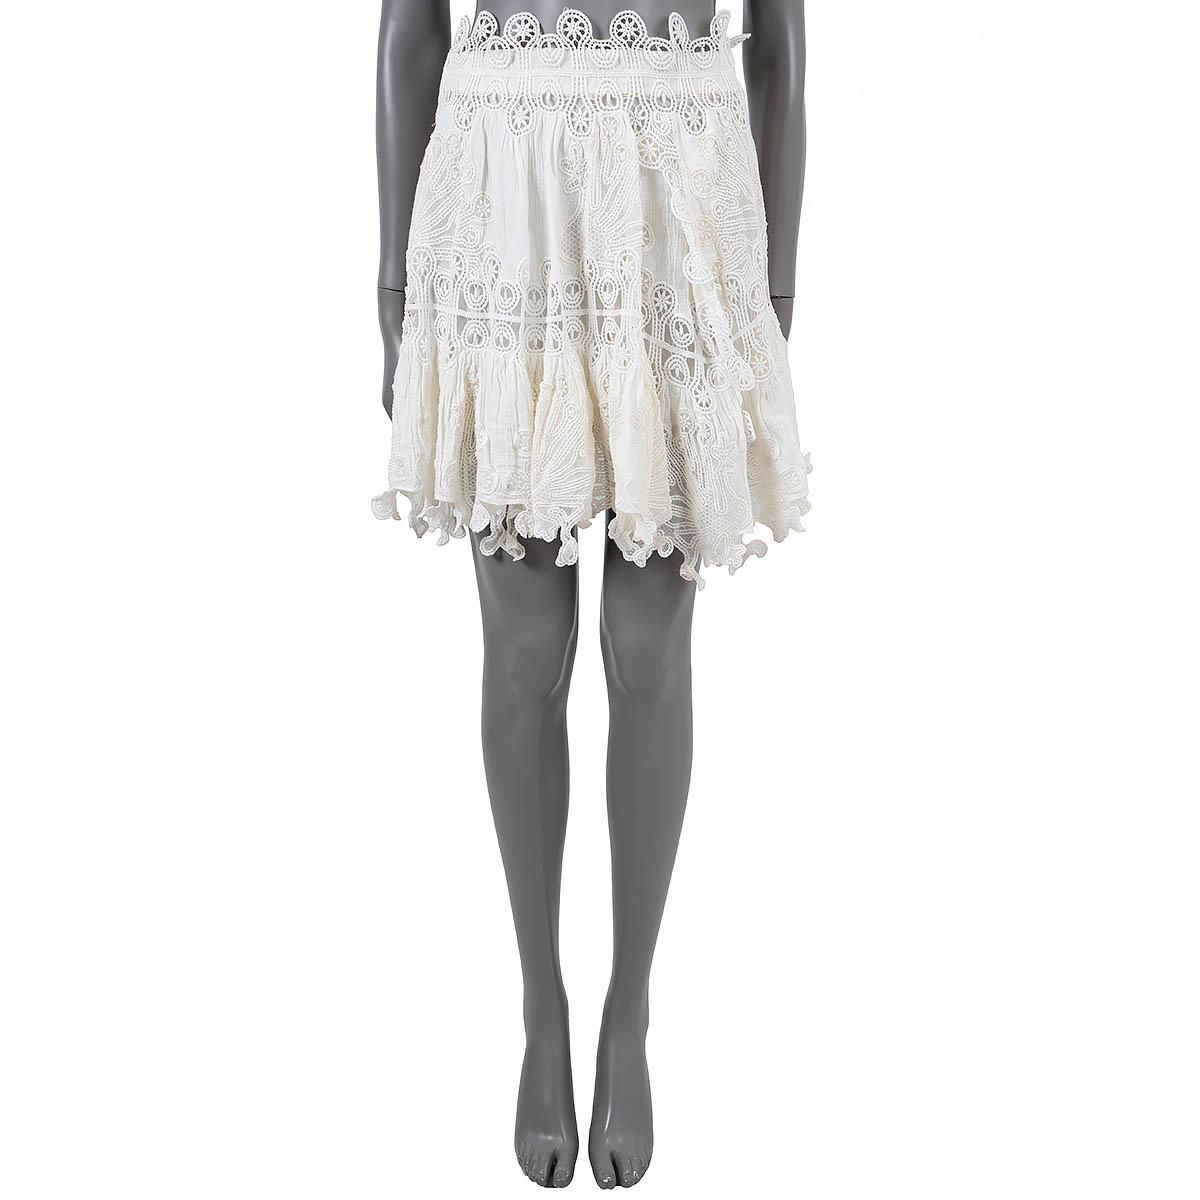 100% authentic Chloé short skirt in Milk (ivory) peacock embroidered lace (linen blend - content tag is barely legible). The design features a zipper on the back and lined in ivory linen (65%) and polyamide (35%). Has been worn once or twice and is